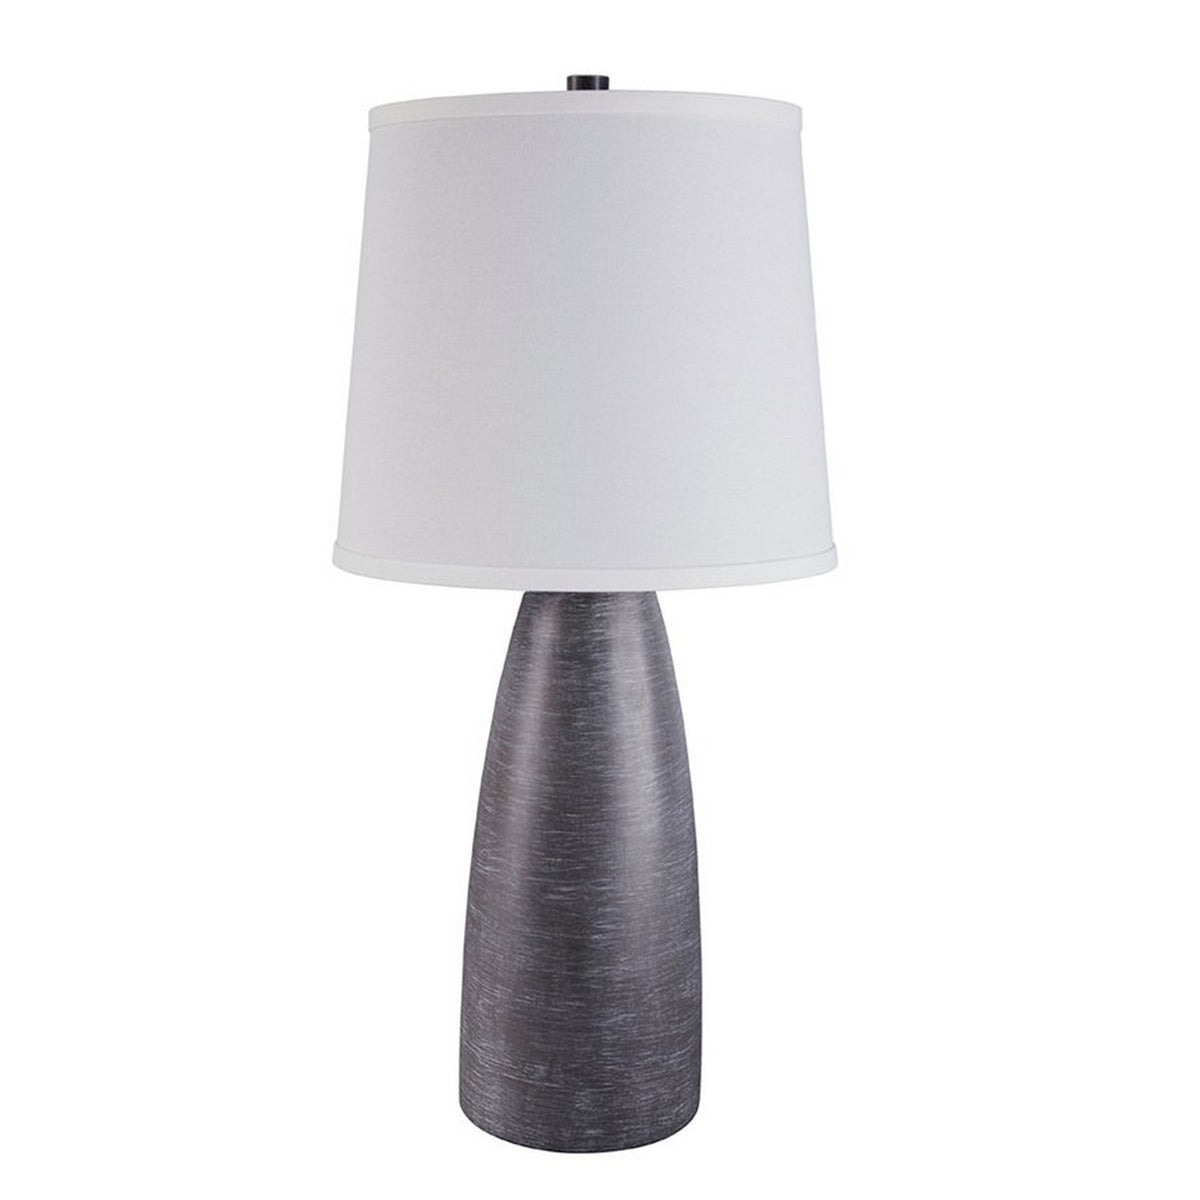 Vase Shape Resin Table Lamp with Fabric Shade, Set of 2, Gray and White - BM227554